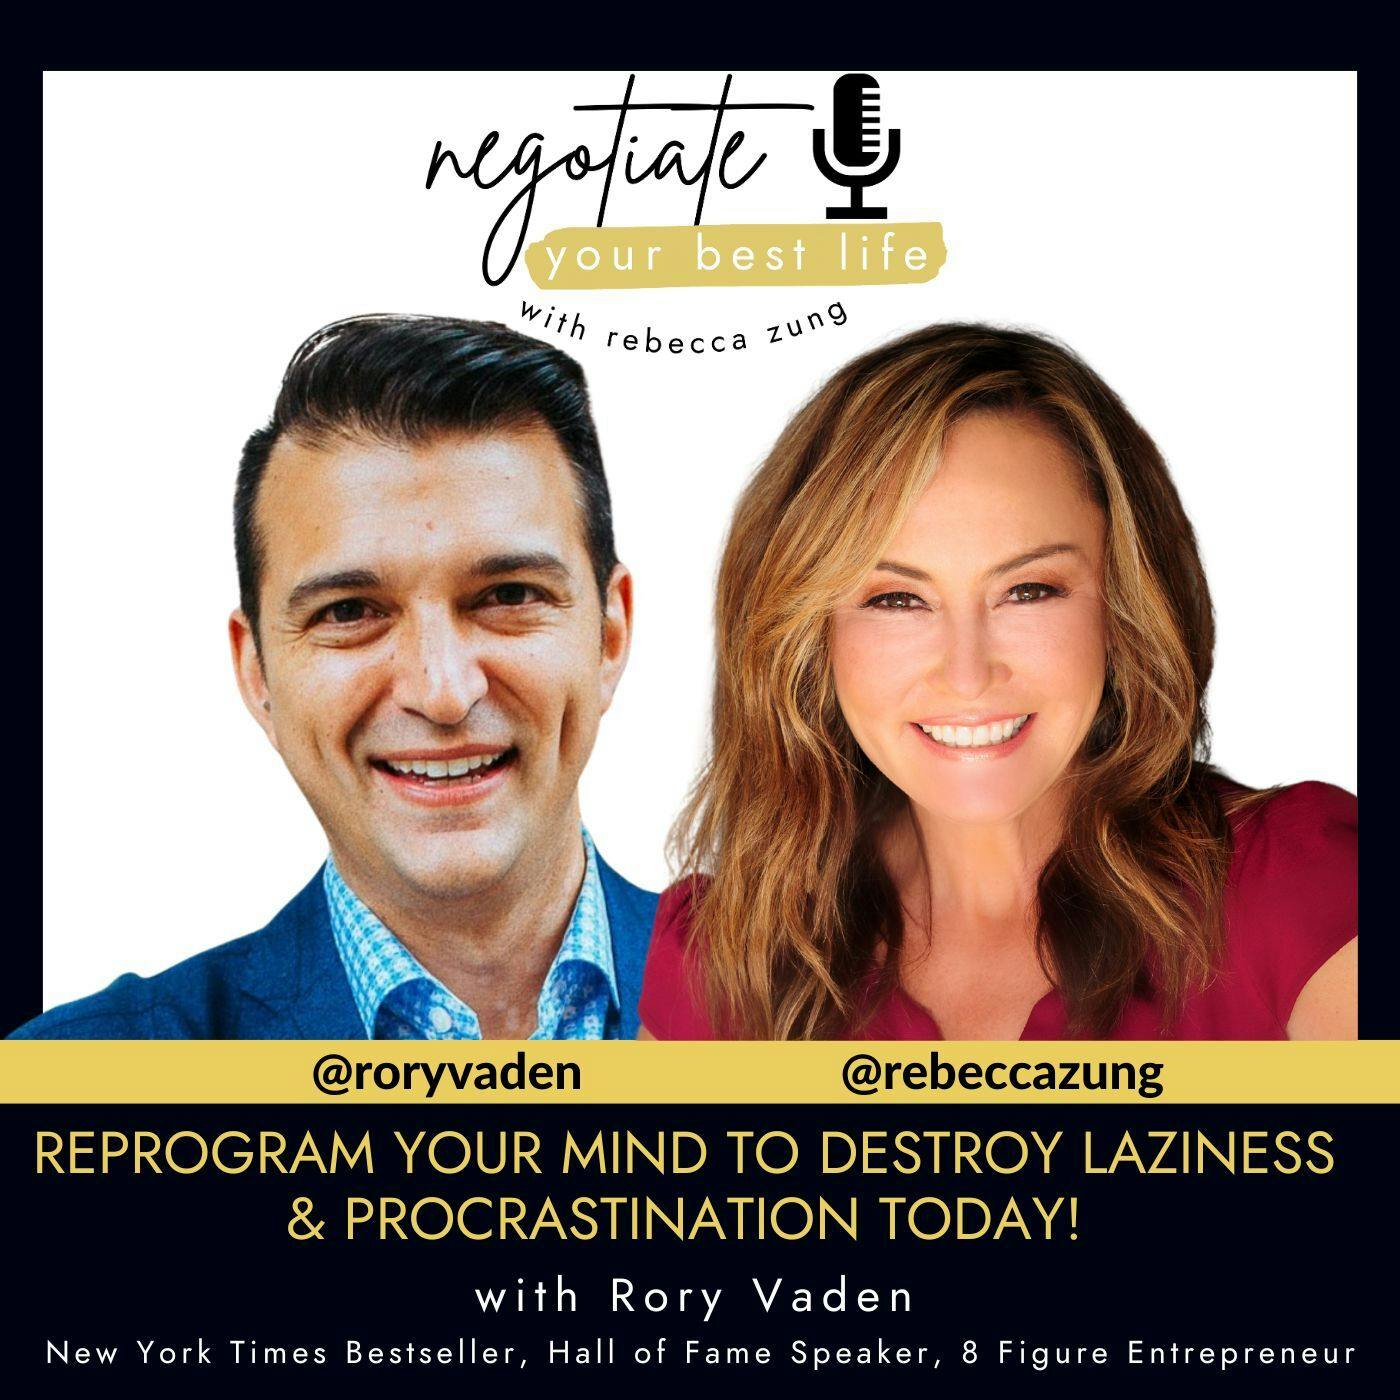 REPROGRAM Your Mind To DESTROY LAZINESS & PROCRASTINATION Today! with Guest Rory Vaden and Rebecca Zung on Negotiate Your Best Life #521